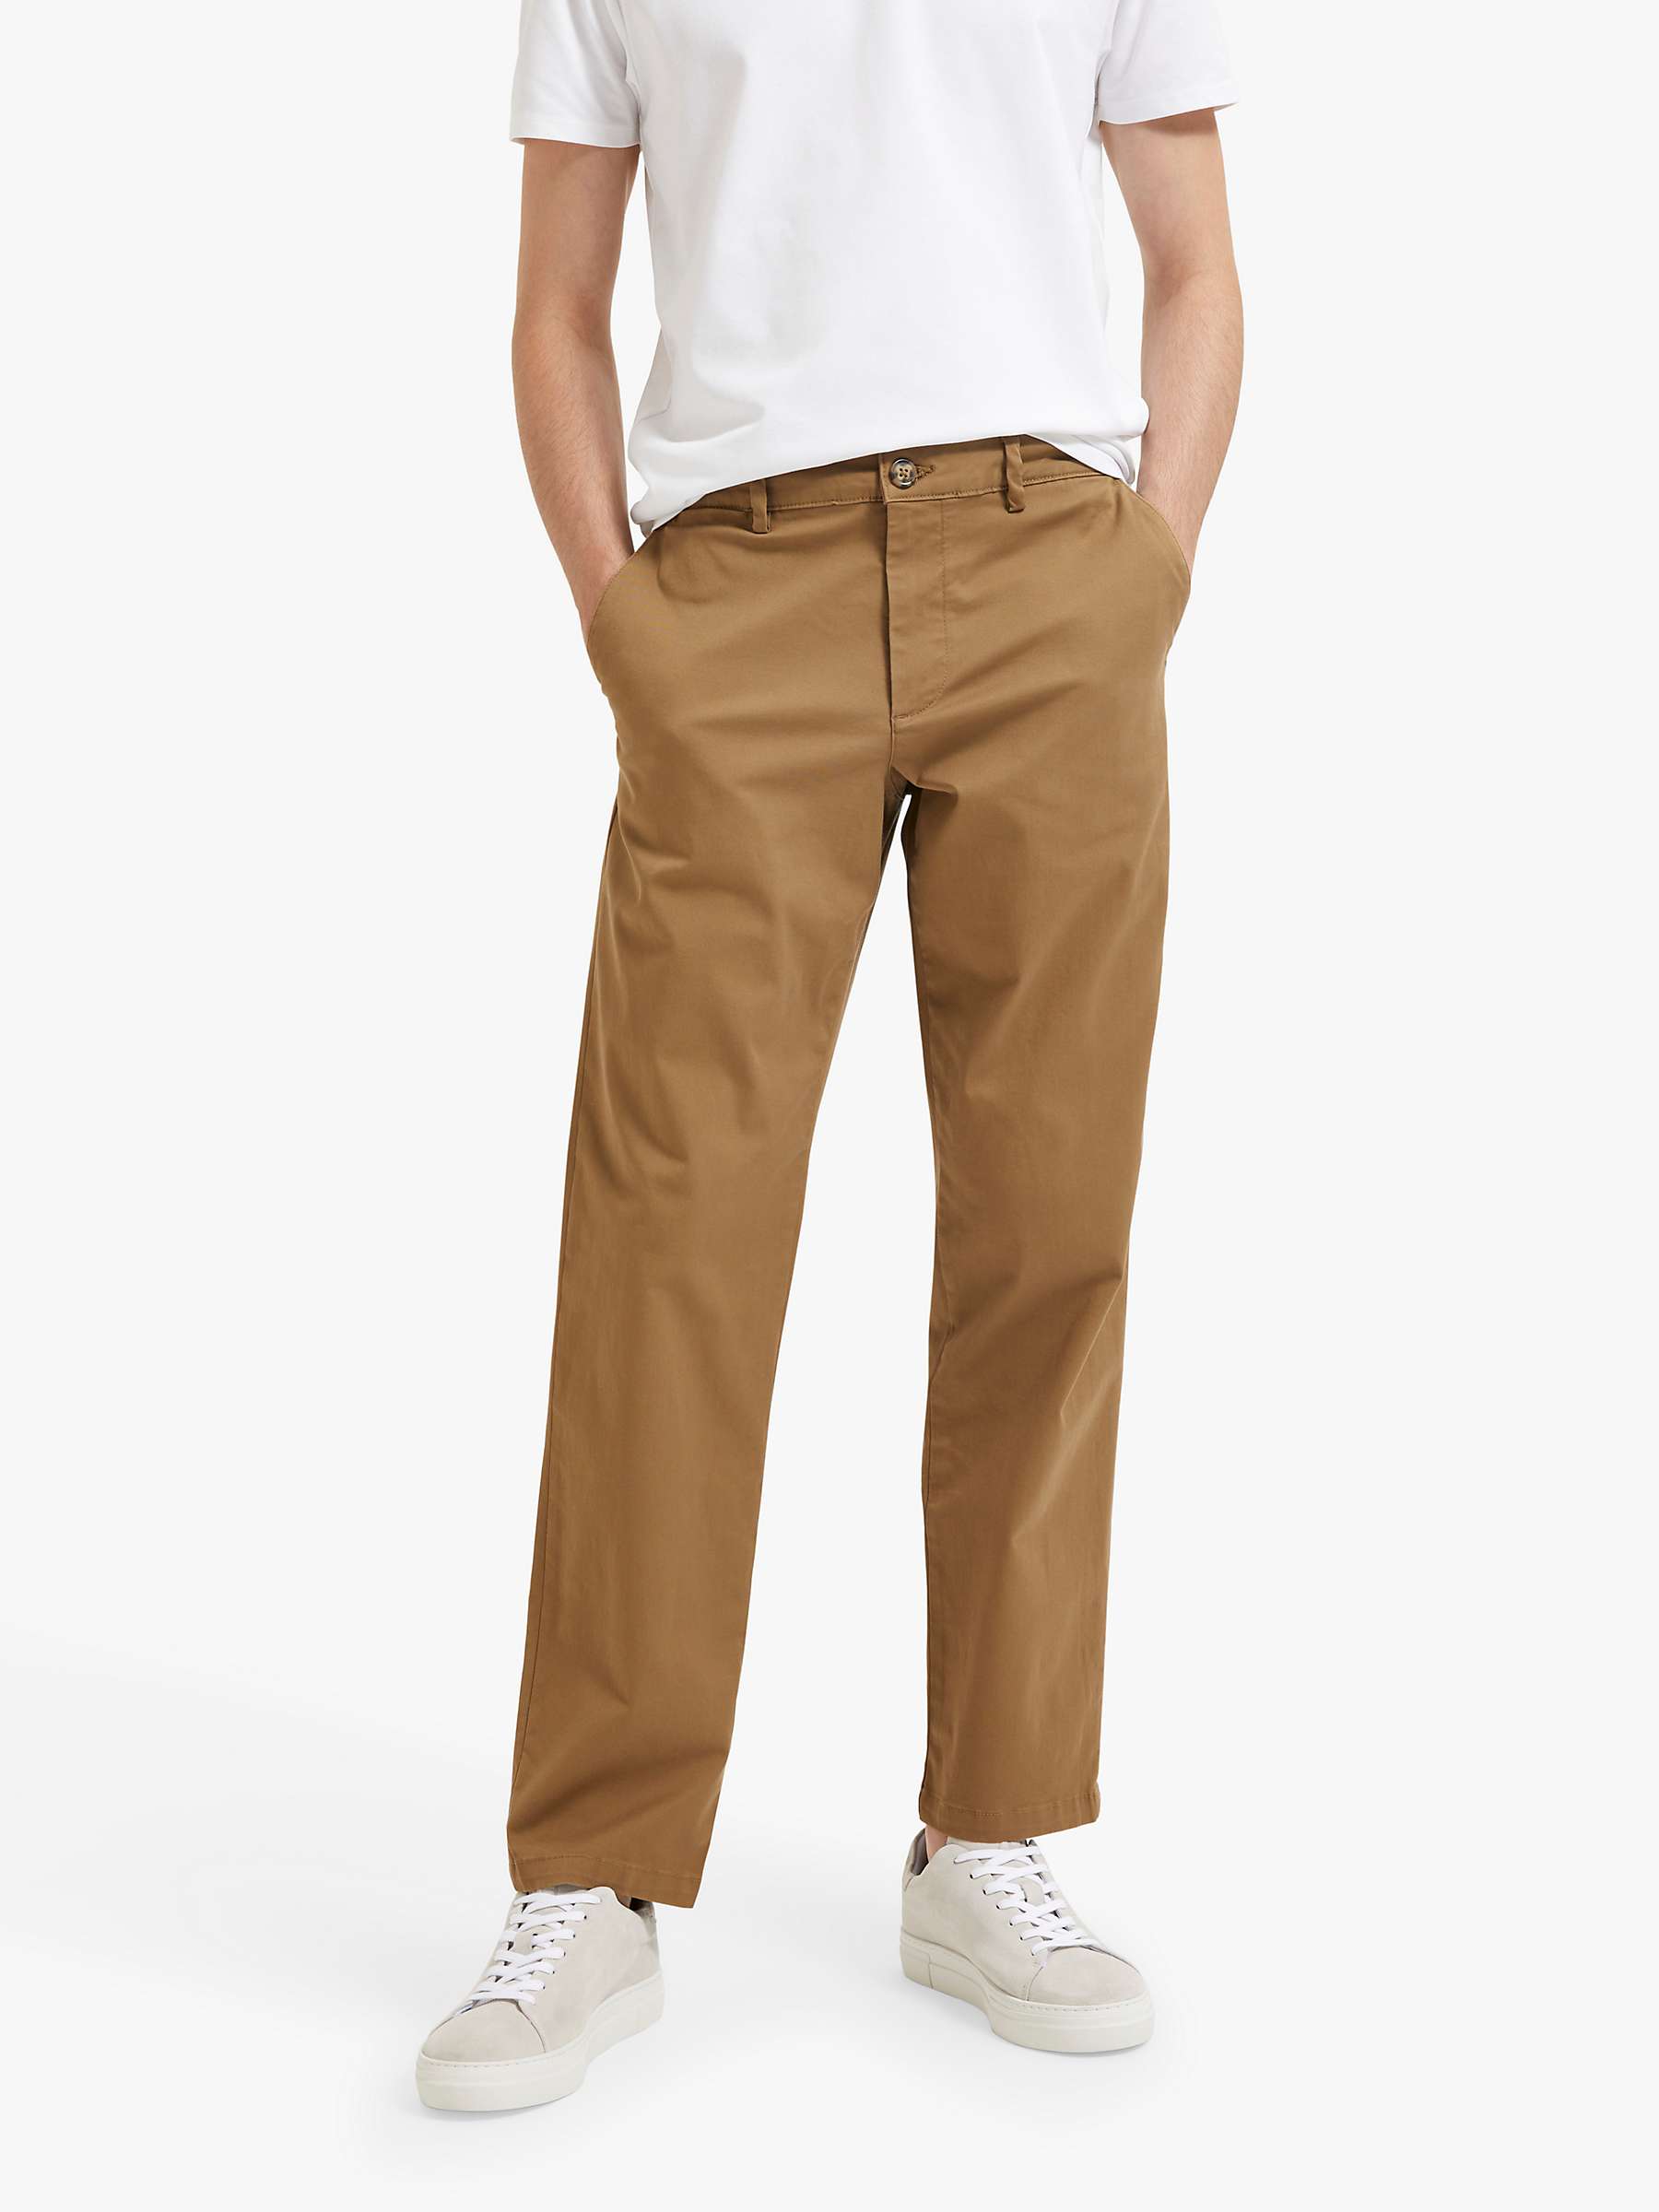 Buy SELECTED HOMME Chino Trousers Online at johnlewis.com